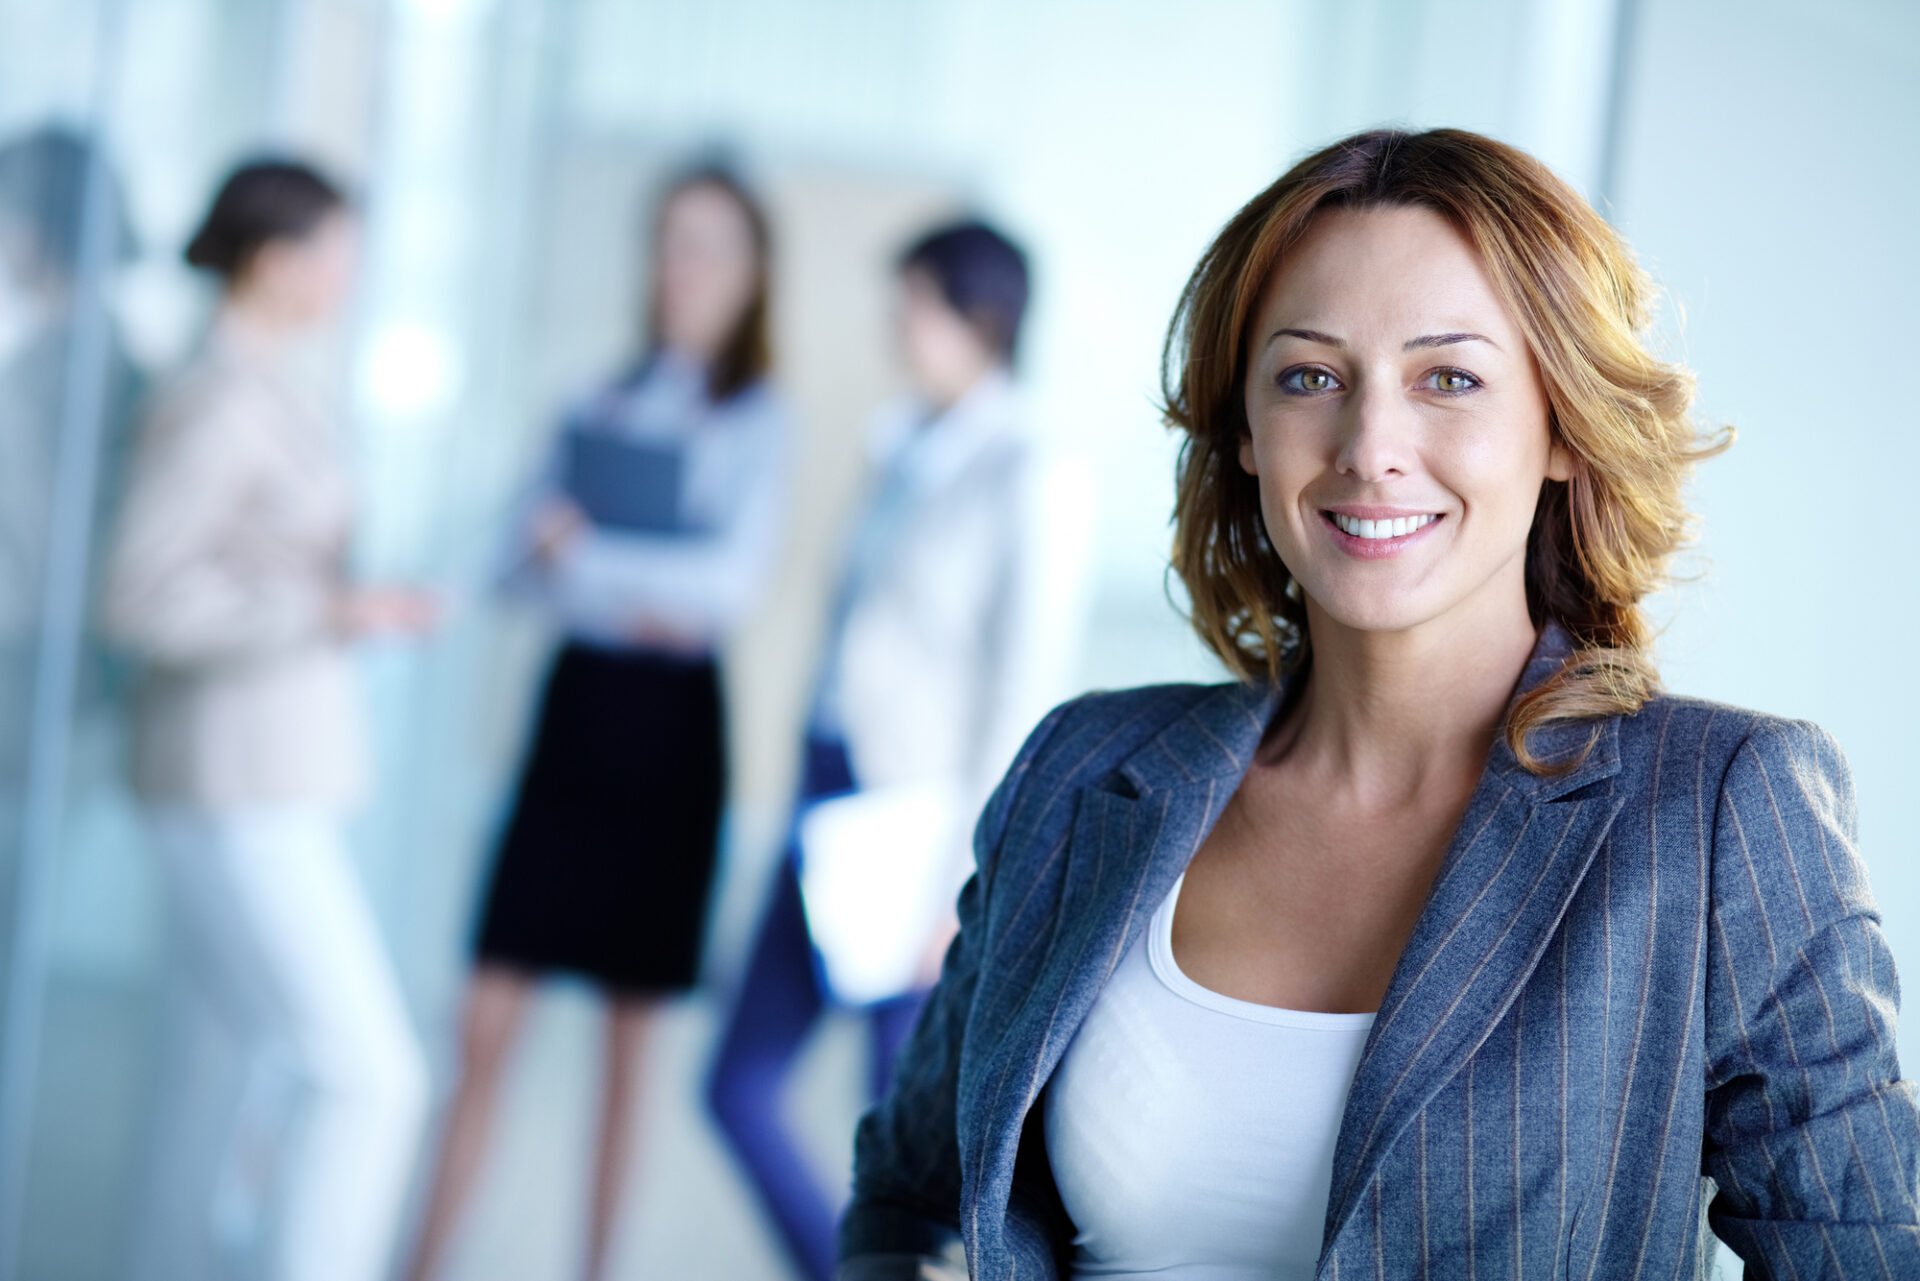 Female leader - confidence in the workplace